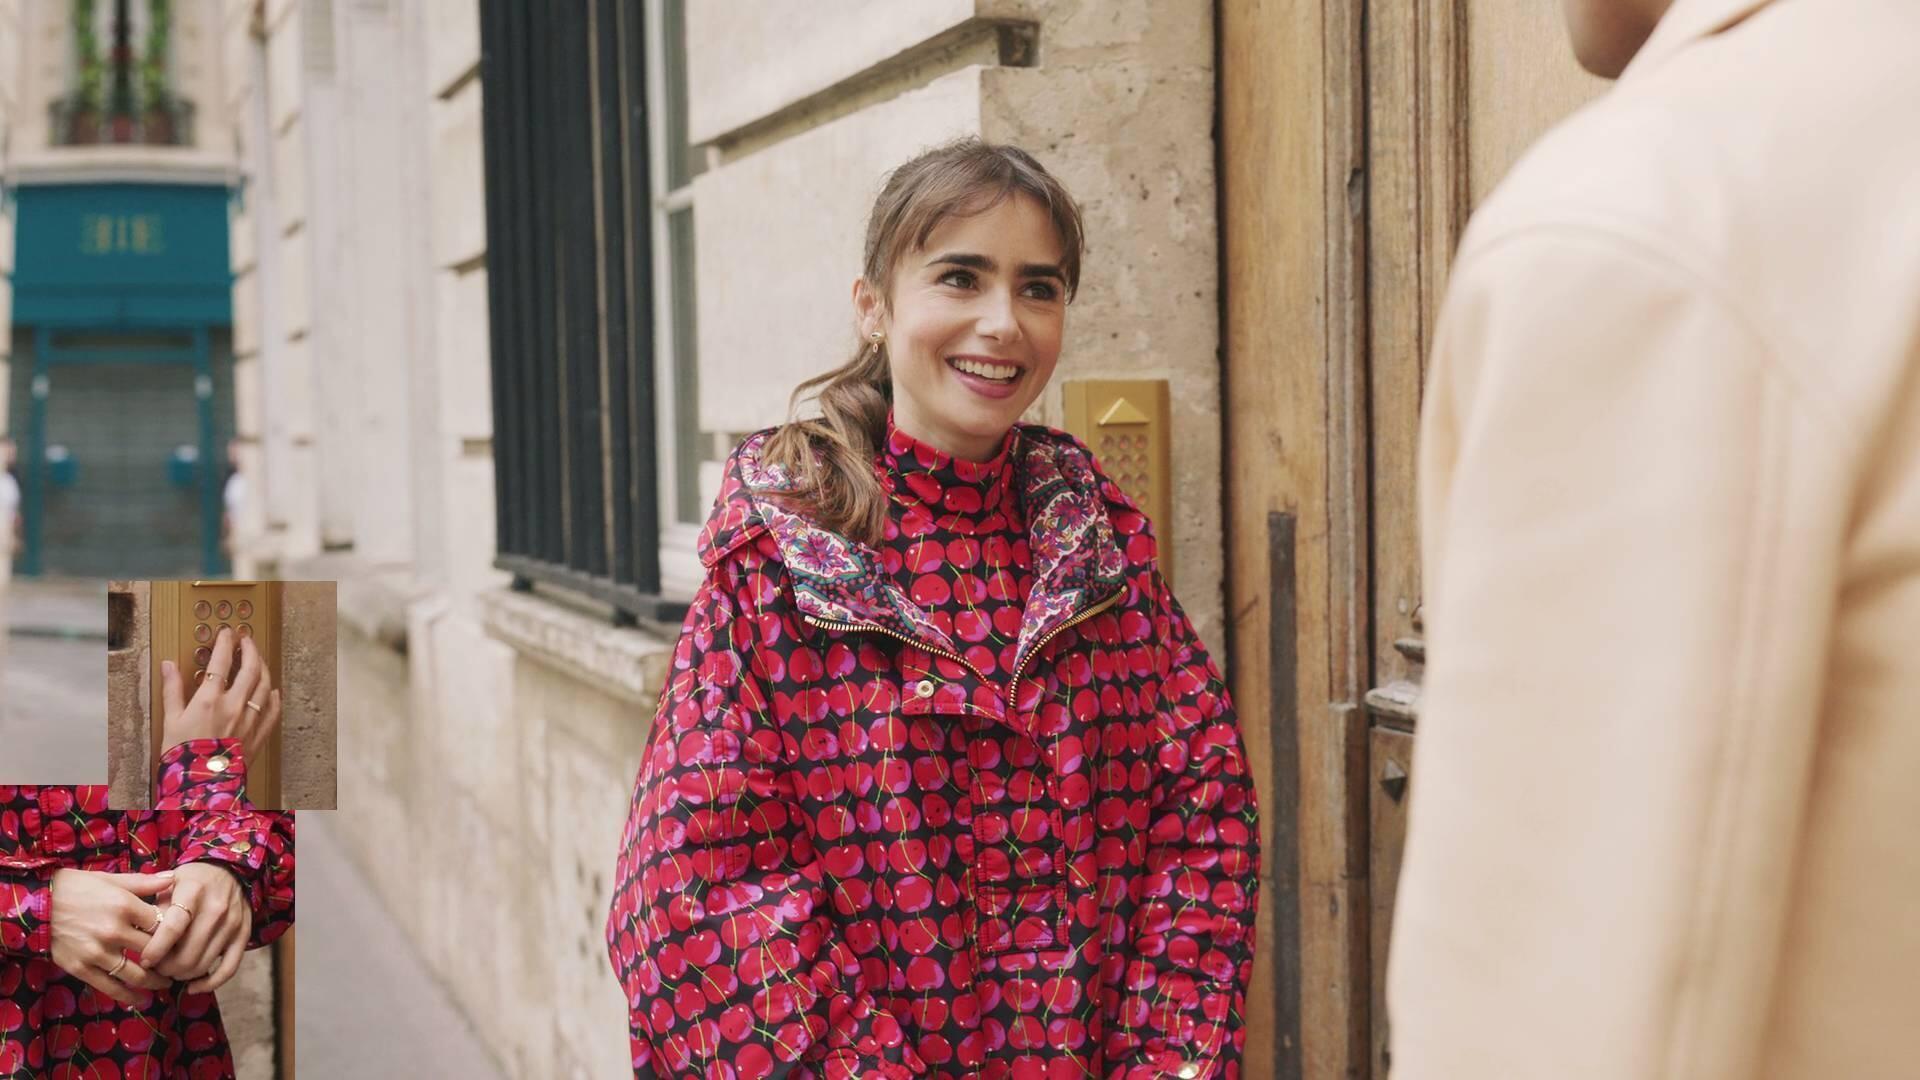 Lily Collins - Emily In Paris | Season 3 Episode 8 | Lily Collins style